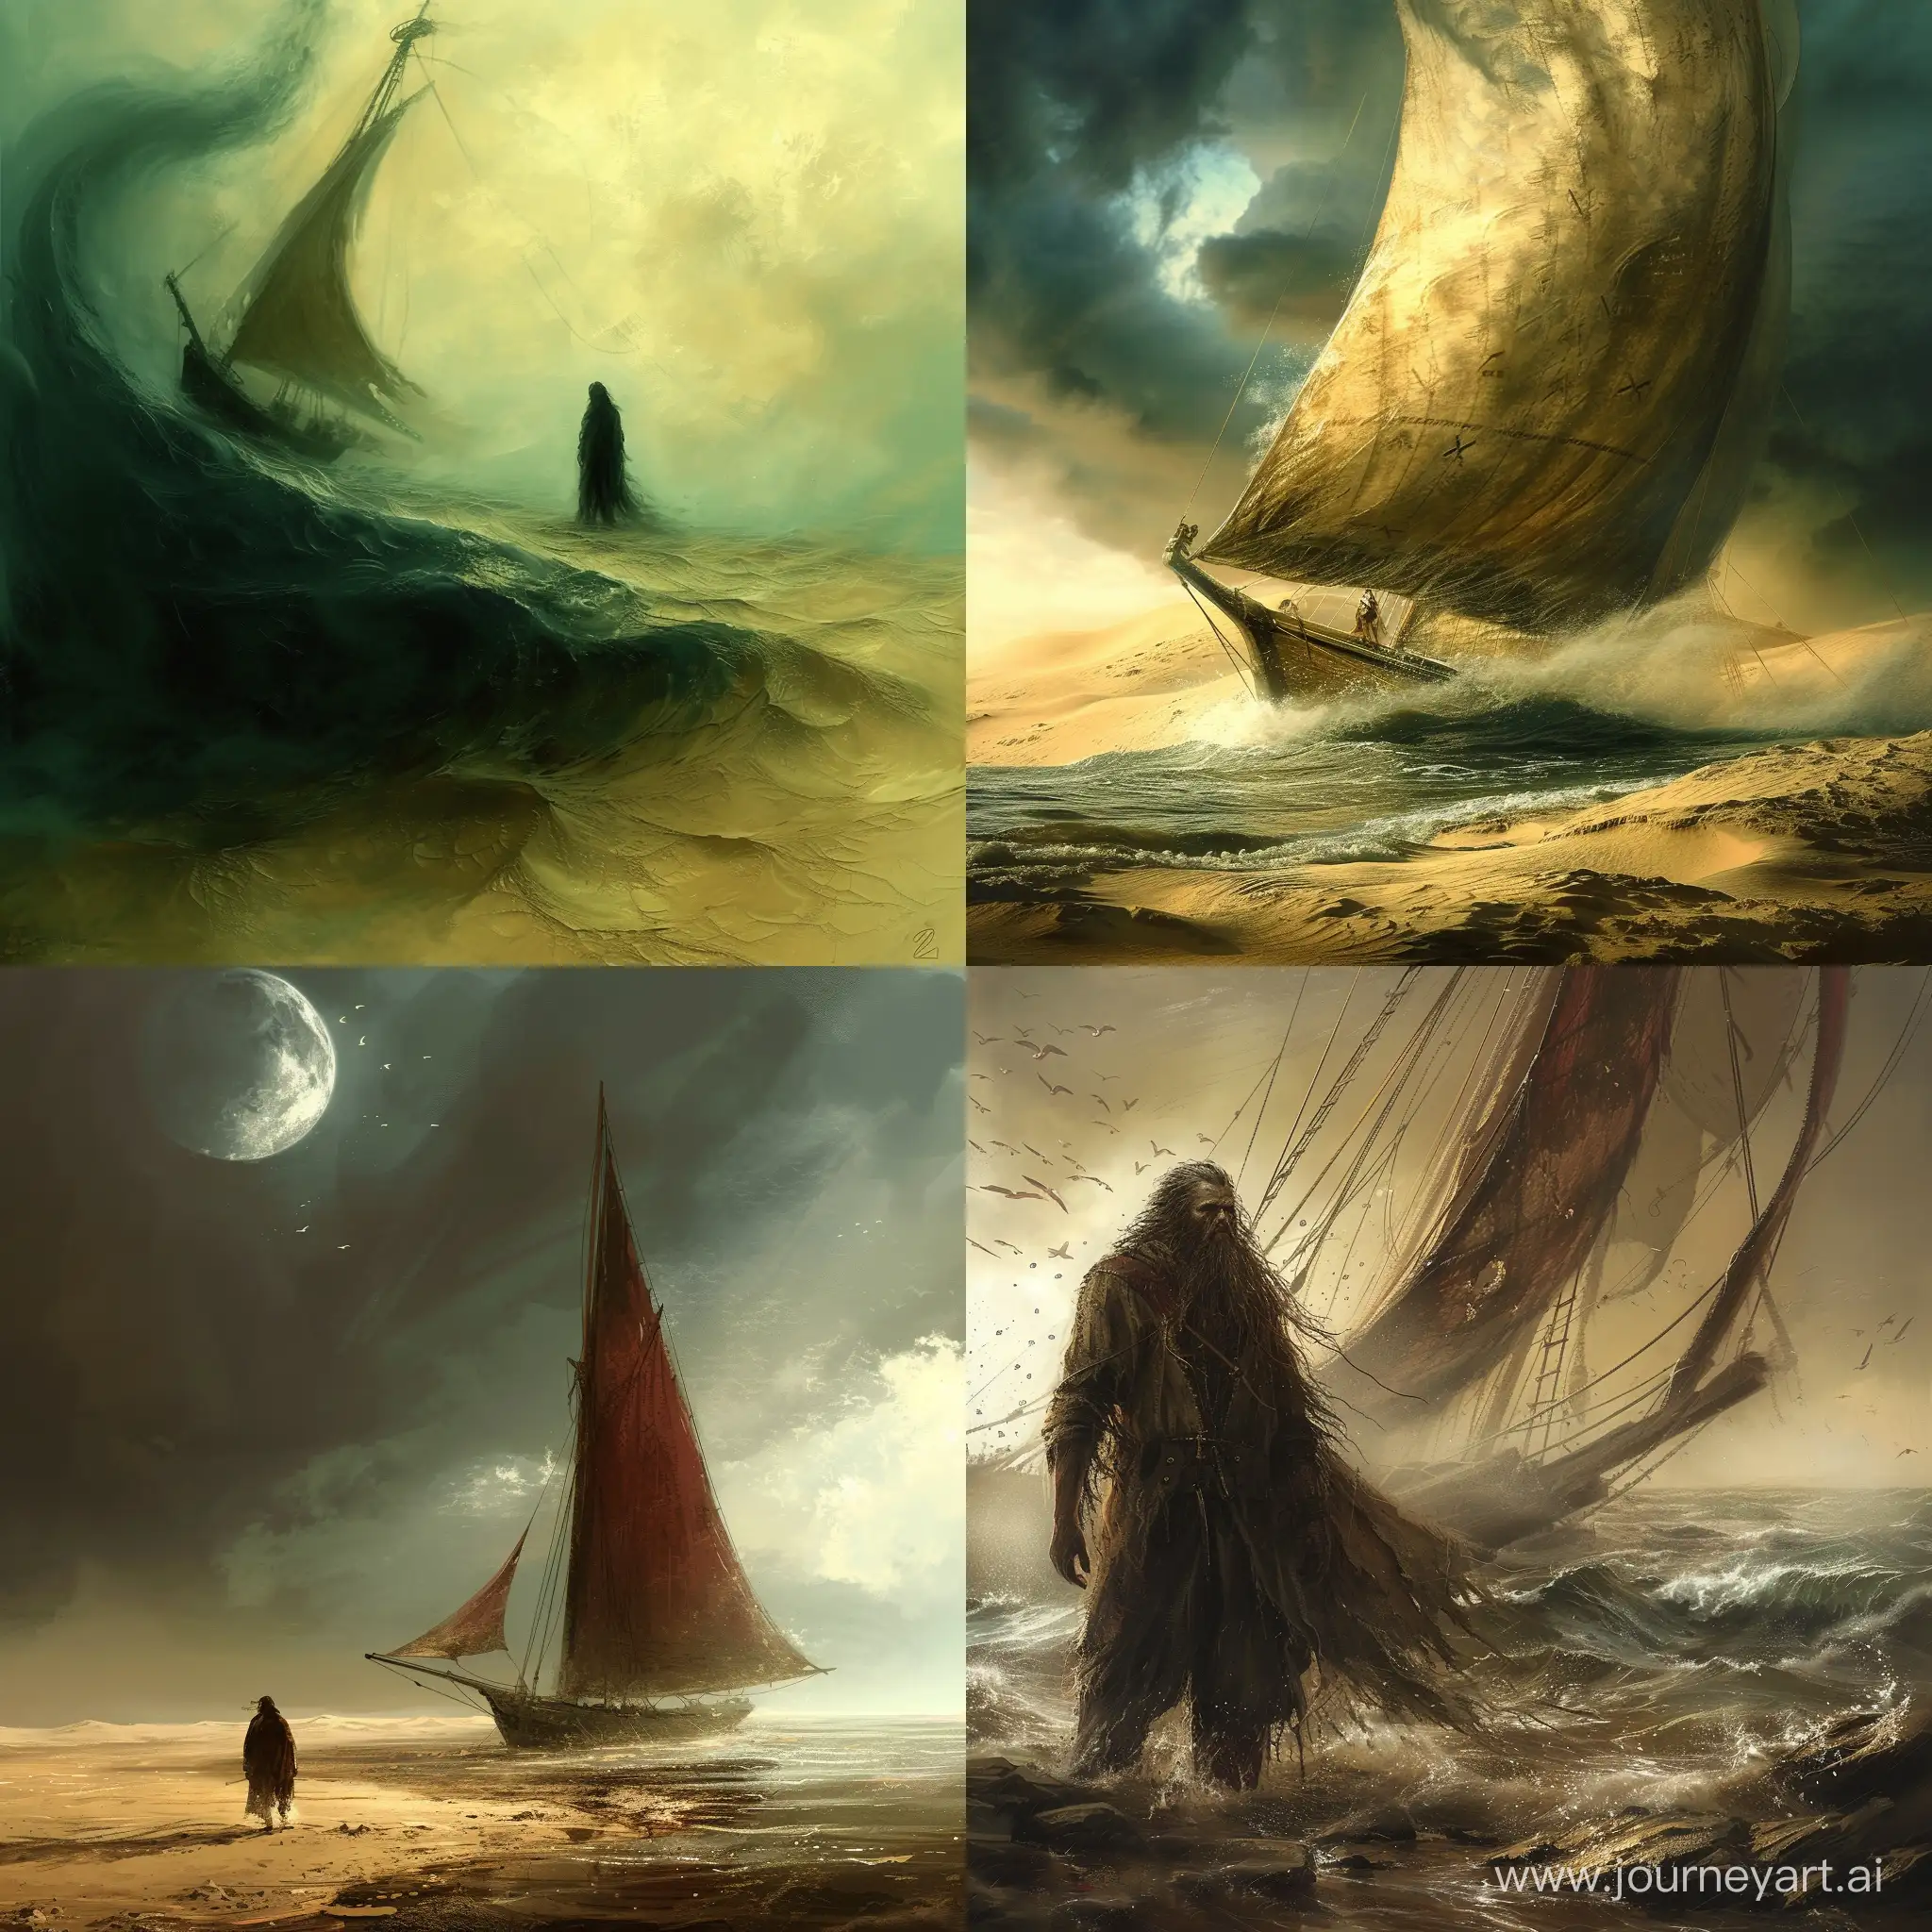 His sails hung limp, his spirit waned,
As Seafarer grappled with emotions unchained.
How could the ocean, once his home so grand,
Transform into a wasteland, a desert of sand?
